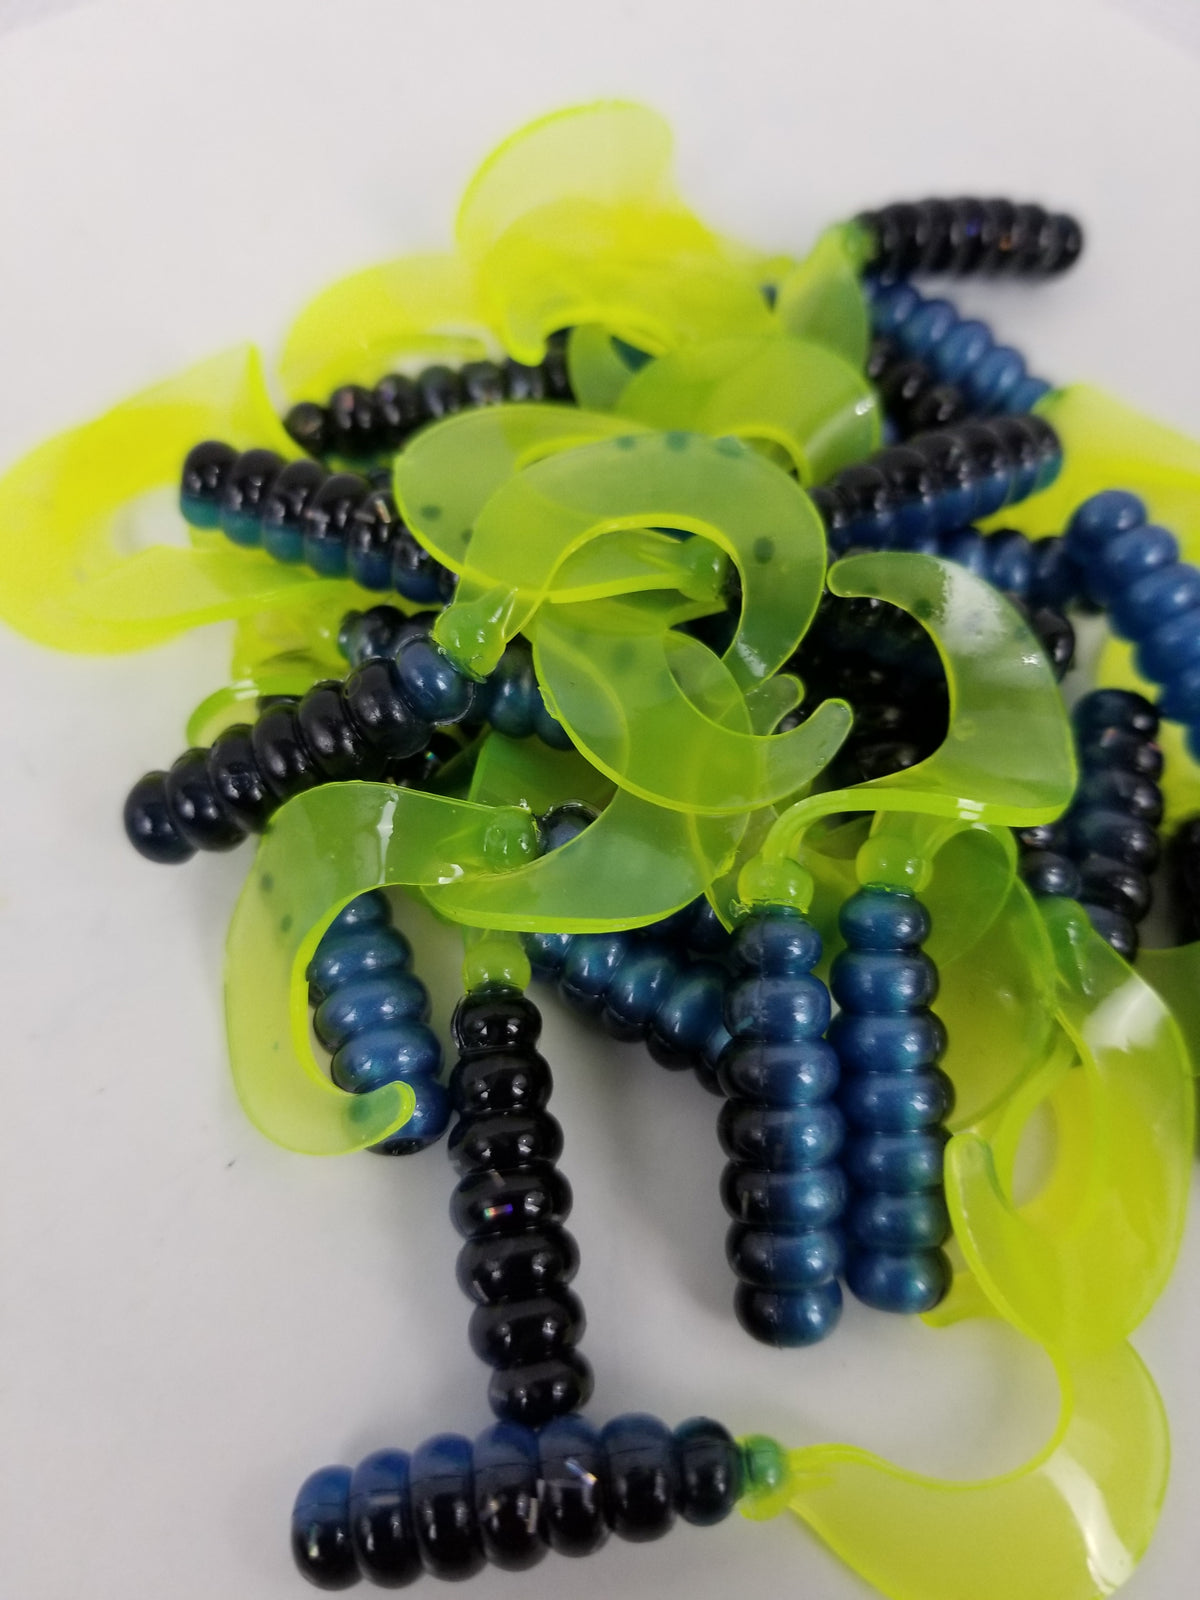 Cam's 2(HOLOGRAM FLAKE) Curly Tail Grub 40pc Blue Black & Chartreuse Curly  Tail Crappie Soft Jigs [A Cam's Exclusive]